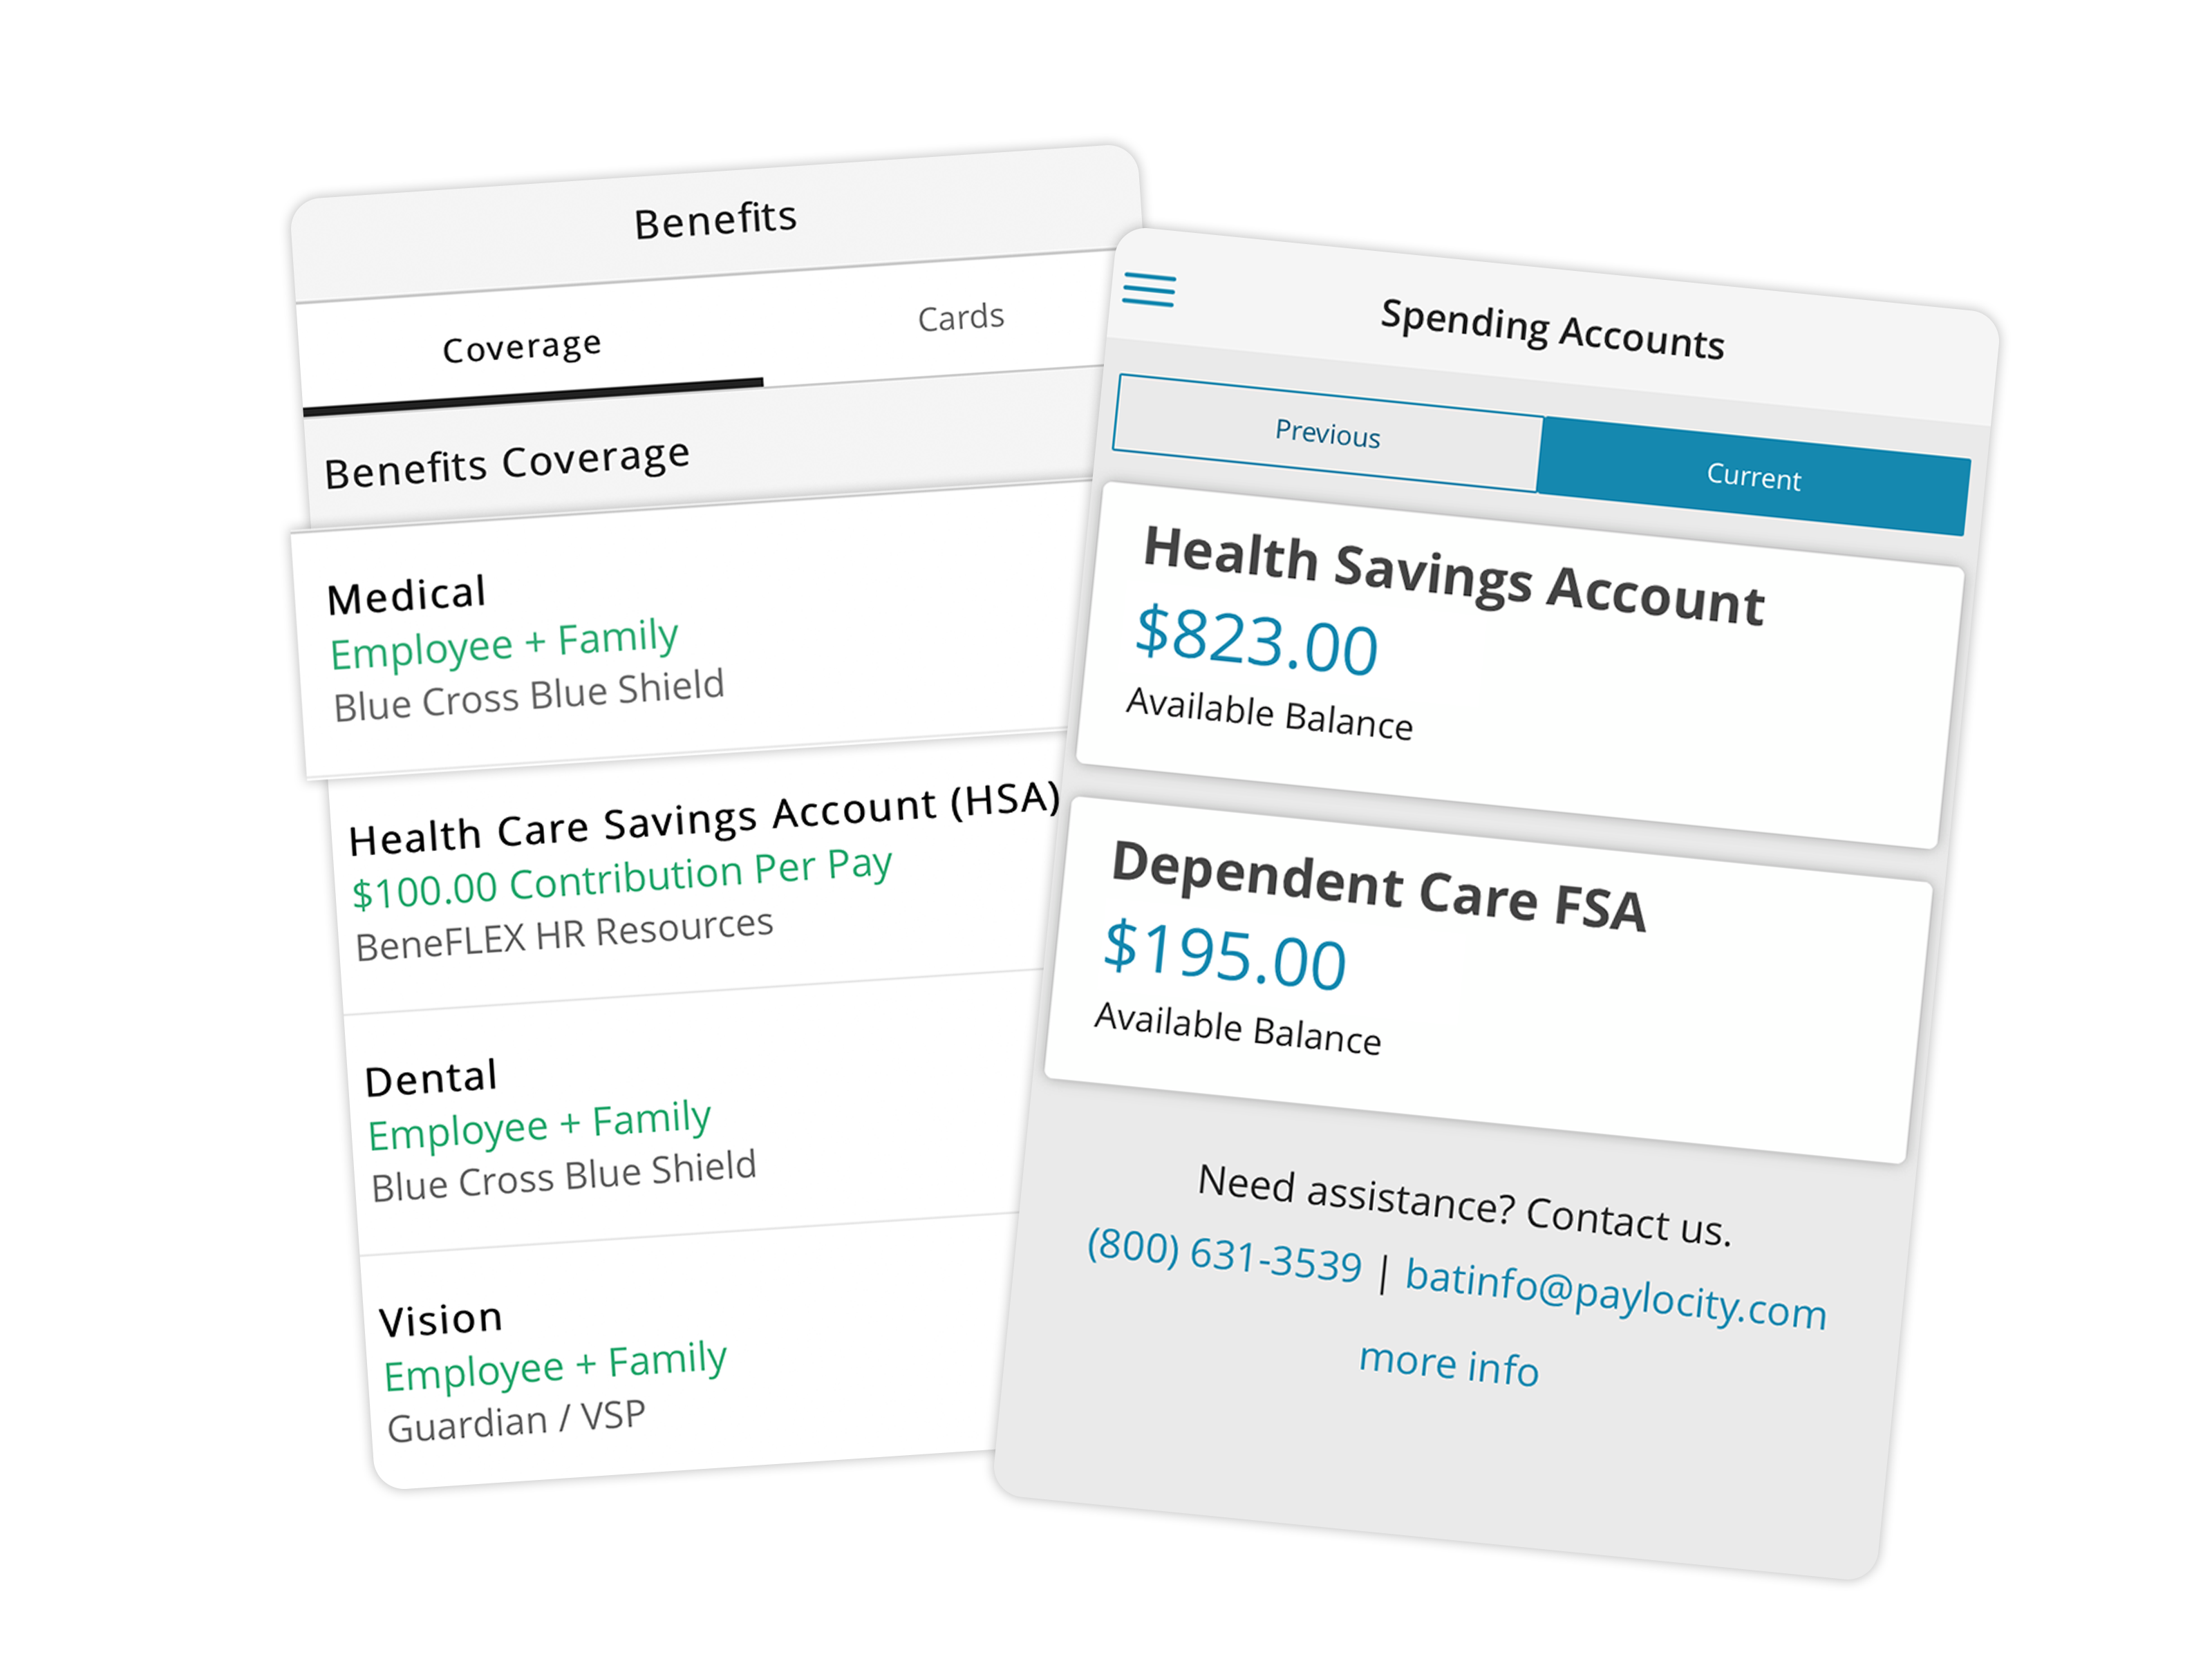 Flexible Benefits, made to order. Administer third-party benefit services like FSAs, HSAs, TMAs, and COBRA with ease. Supplement your standard plans with complementary programs, giving your employees the benefits options they need.